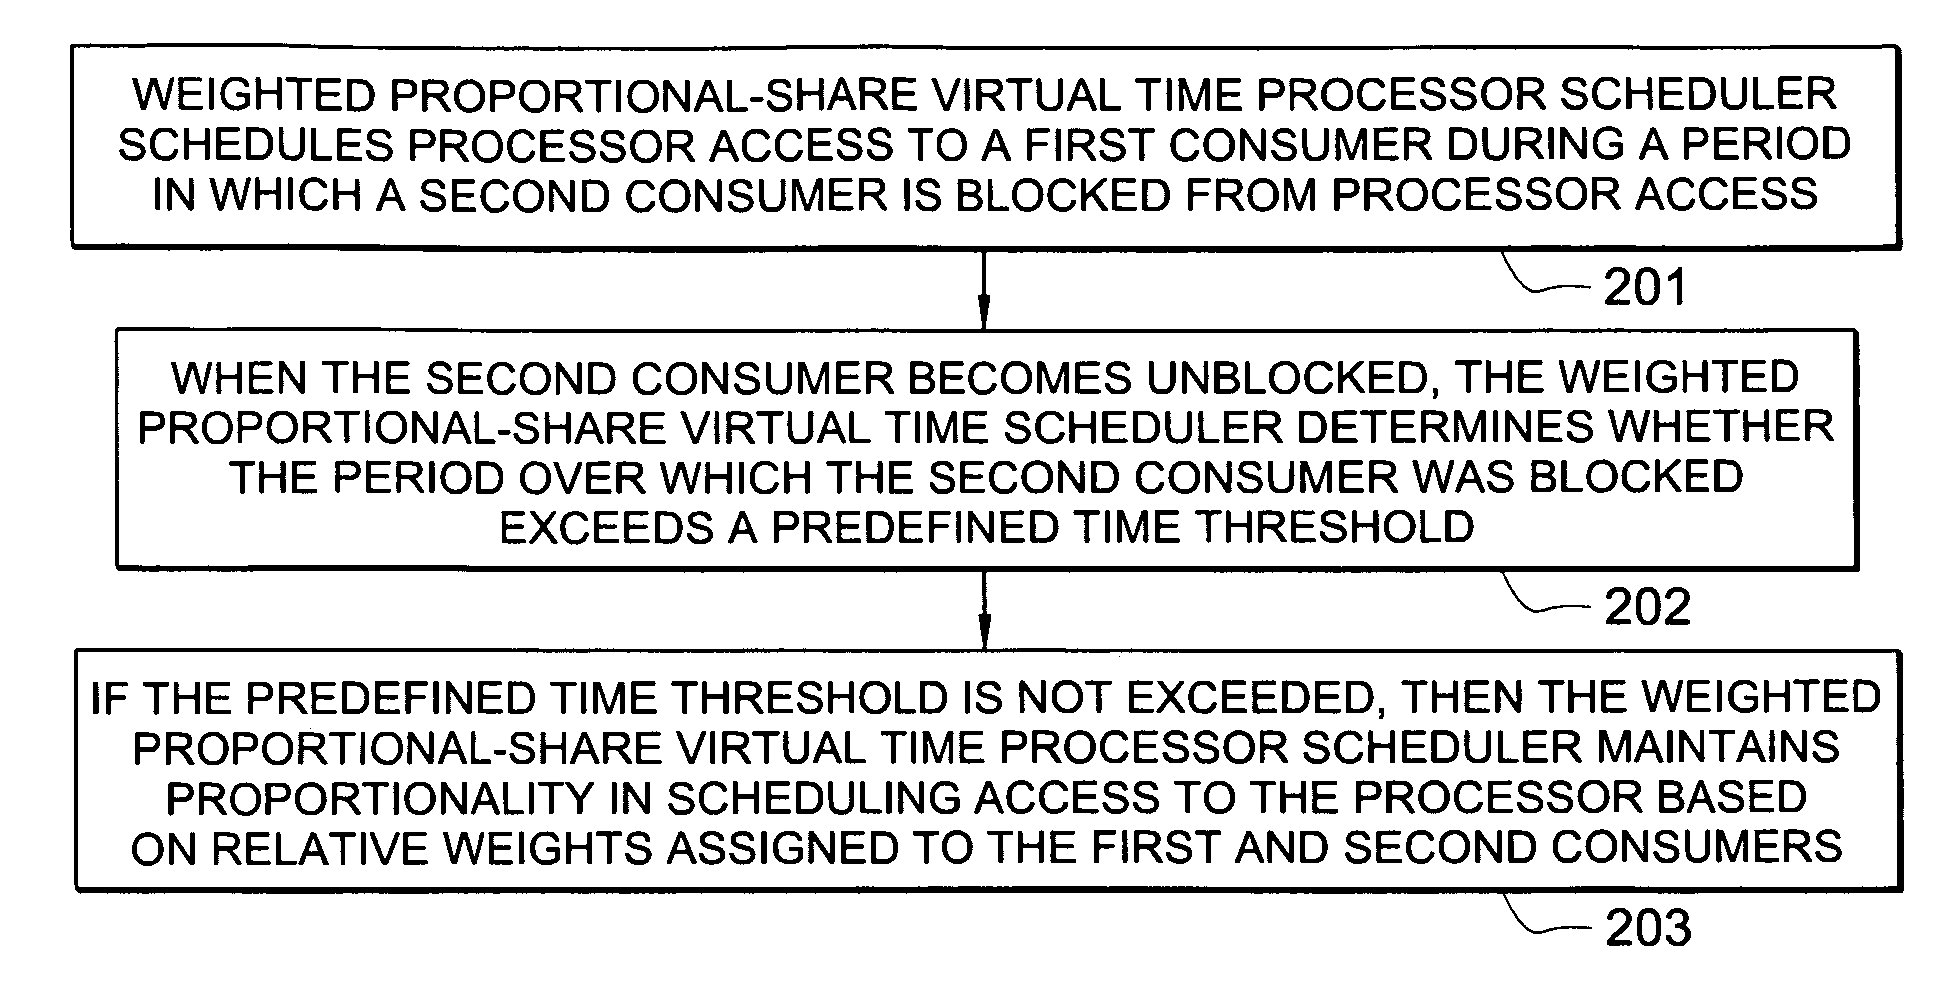 Fair weighted proportional-share virtual time scheduler